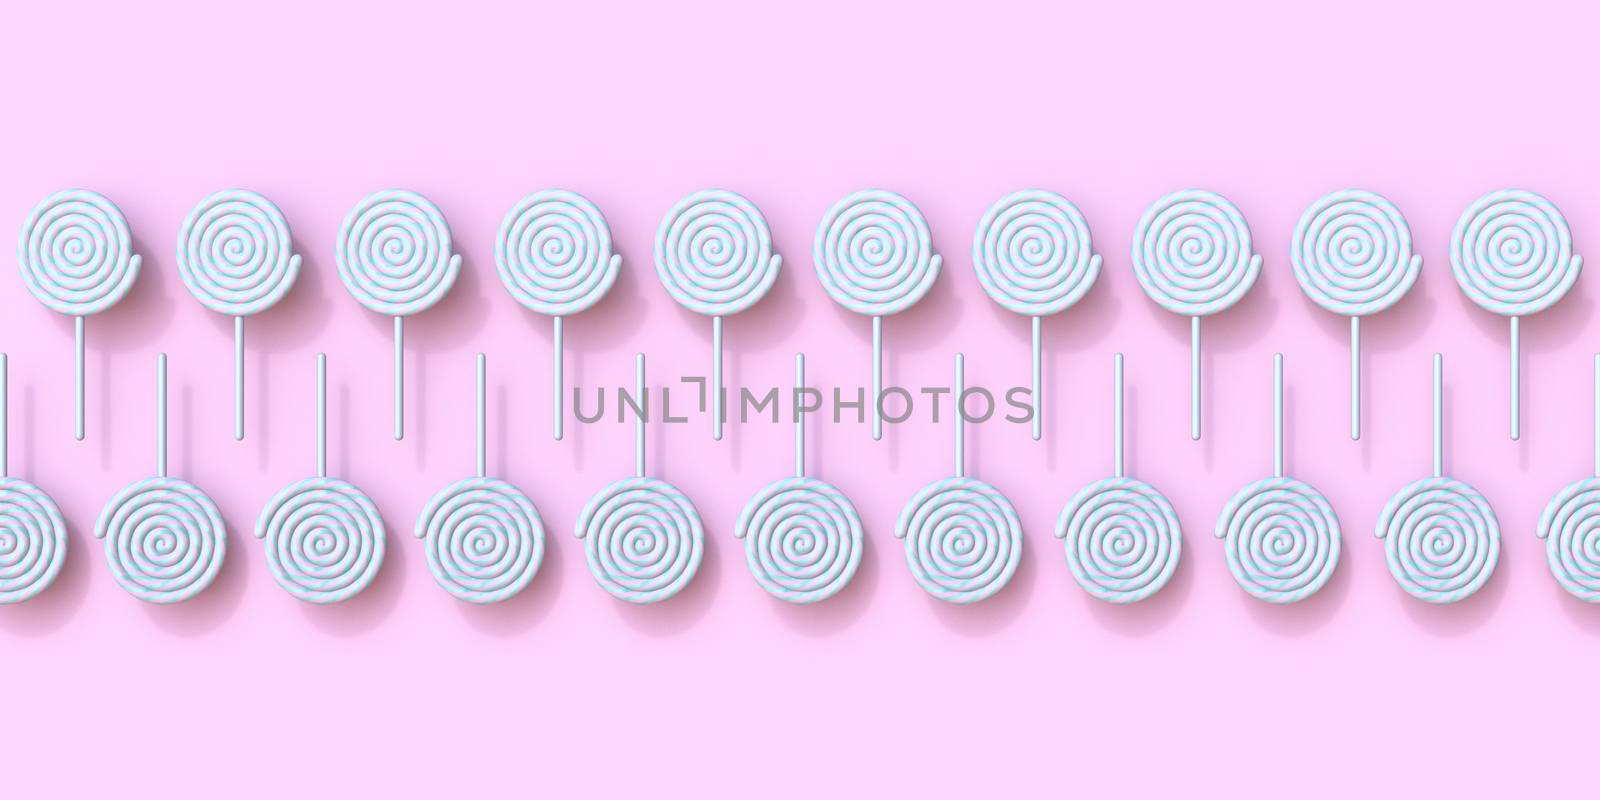 Lollipops arranged in two rows 3D render illustration isolated on pink background